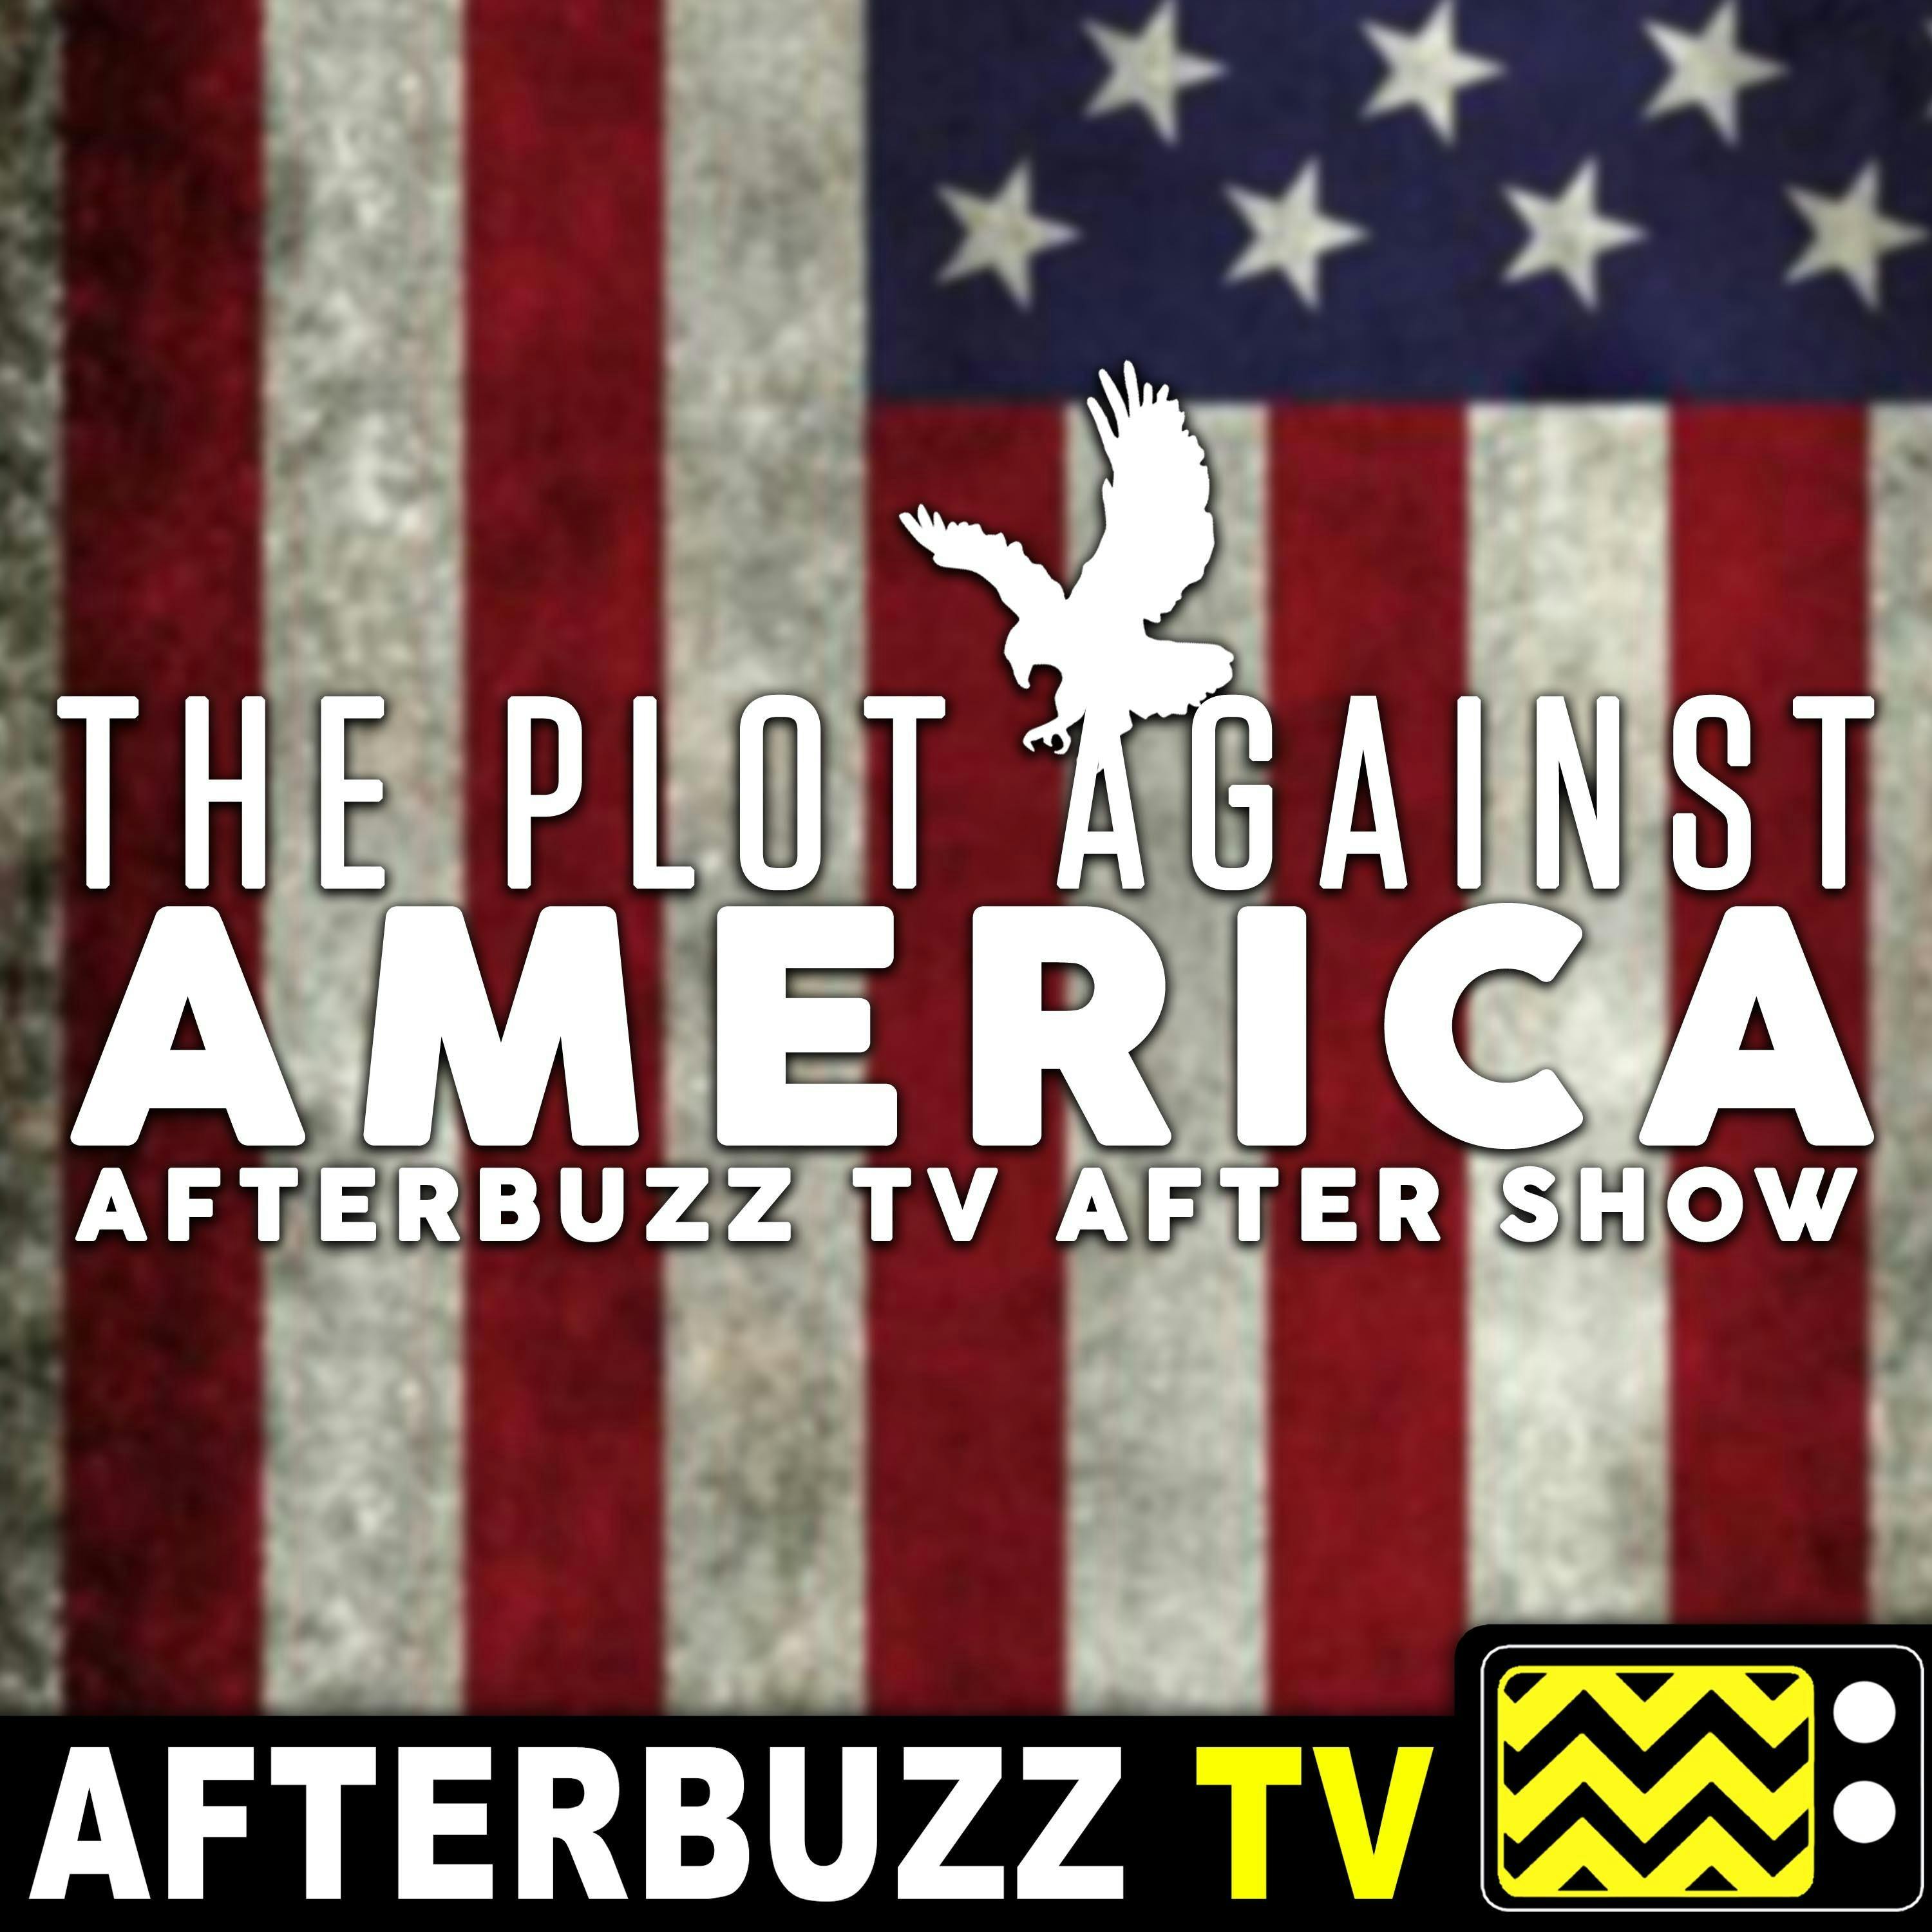 A Season of Anti-Semite & Political Angst That Finally Comes to a Head- S1 E6 'The Plot Against America' After Show